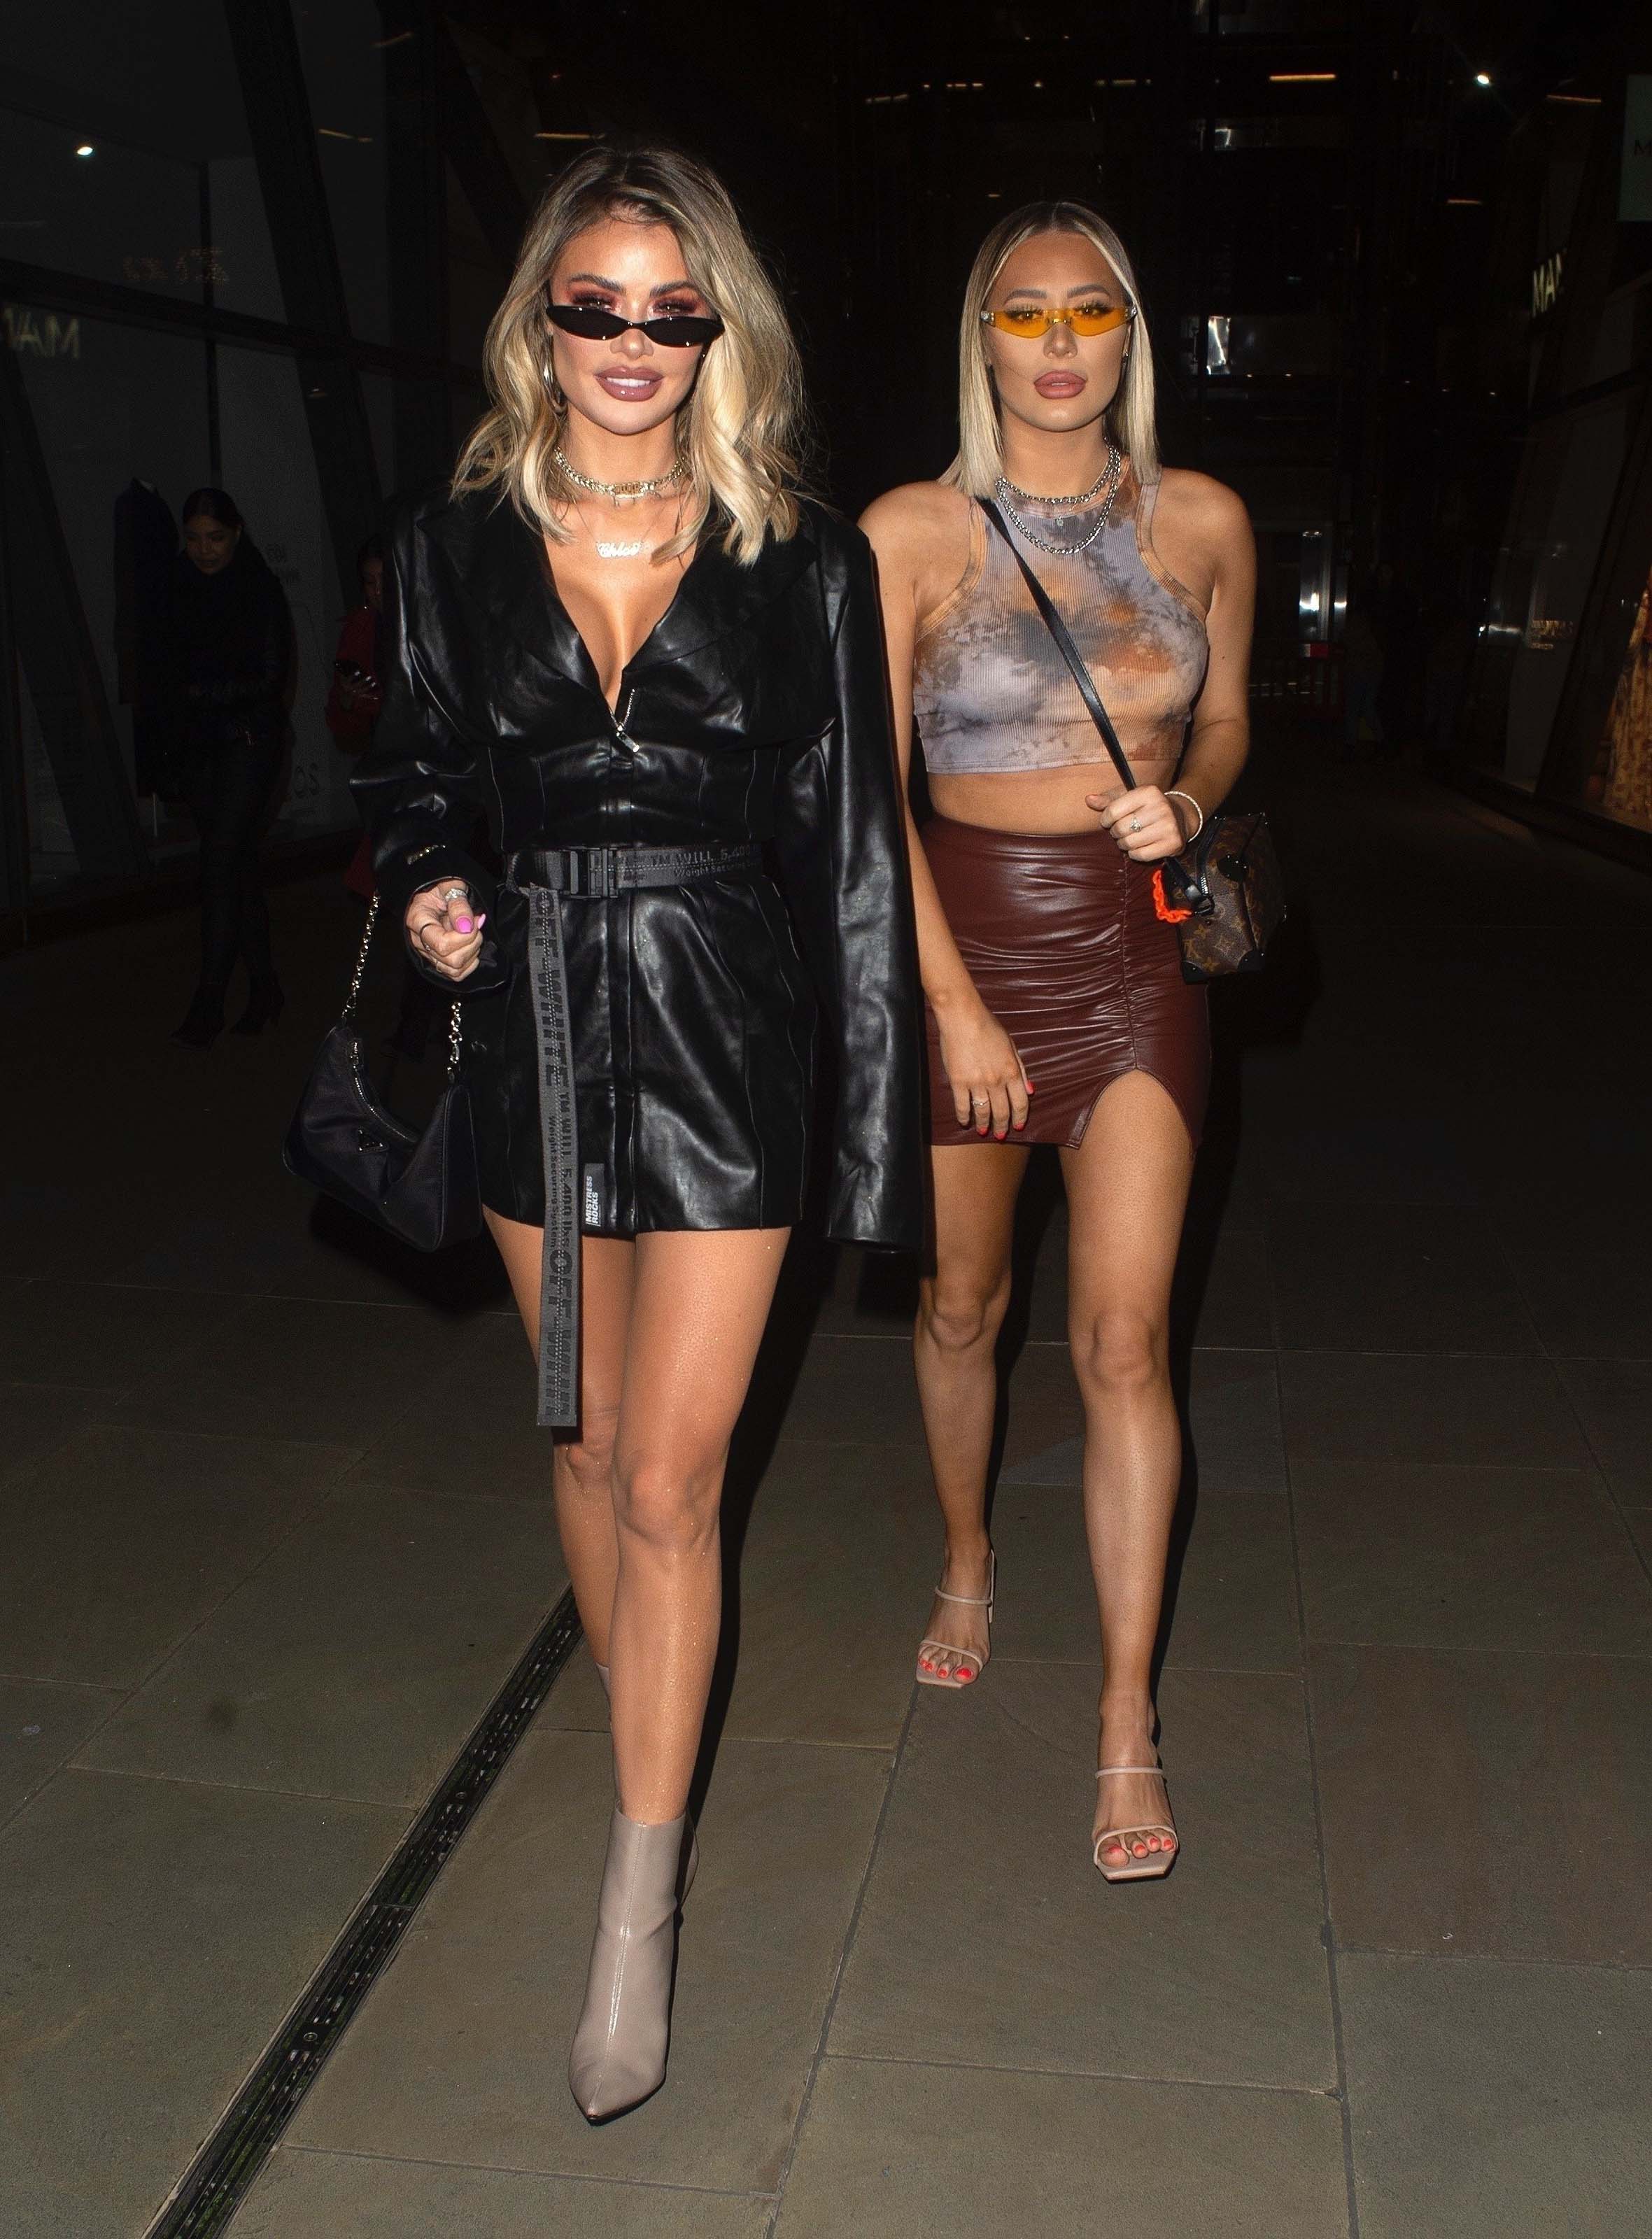 Demi and Chloe Sims at The Ivy Asia St Paul’s